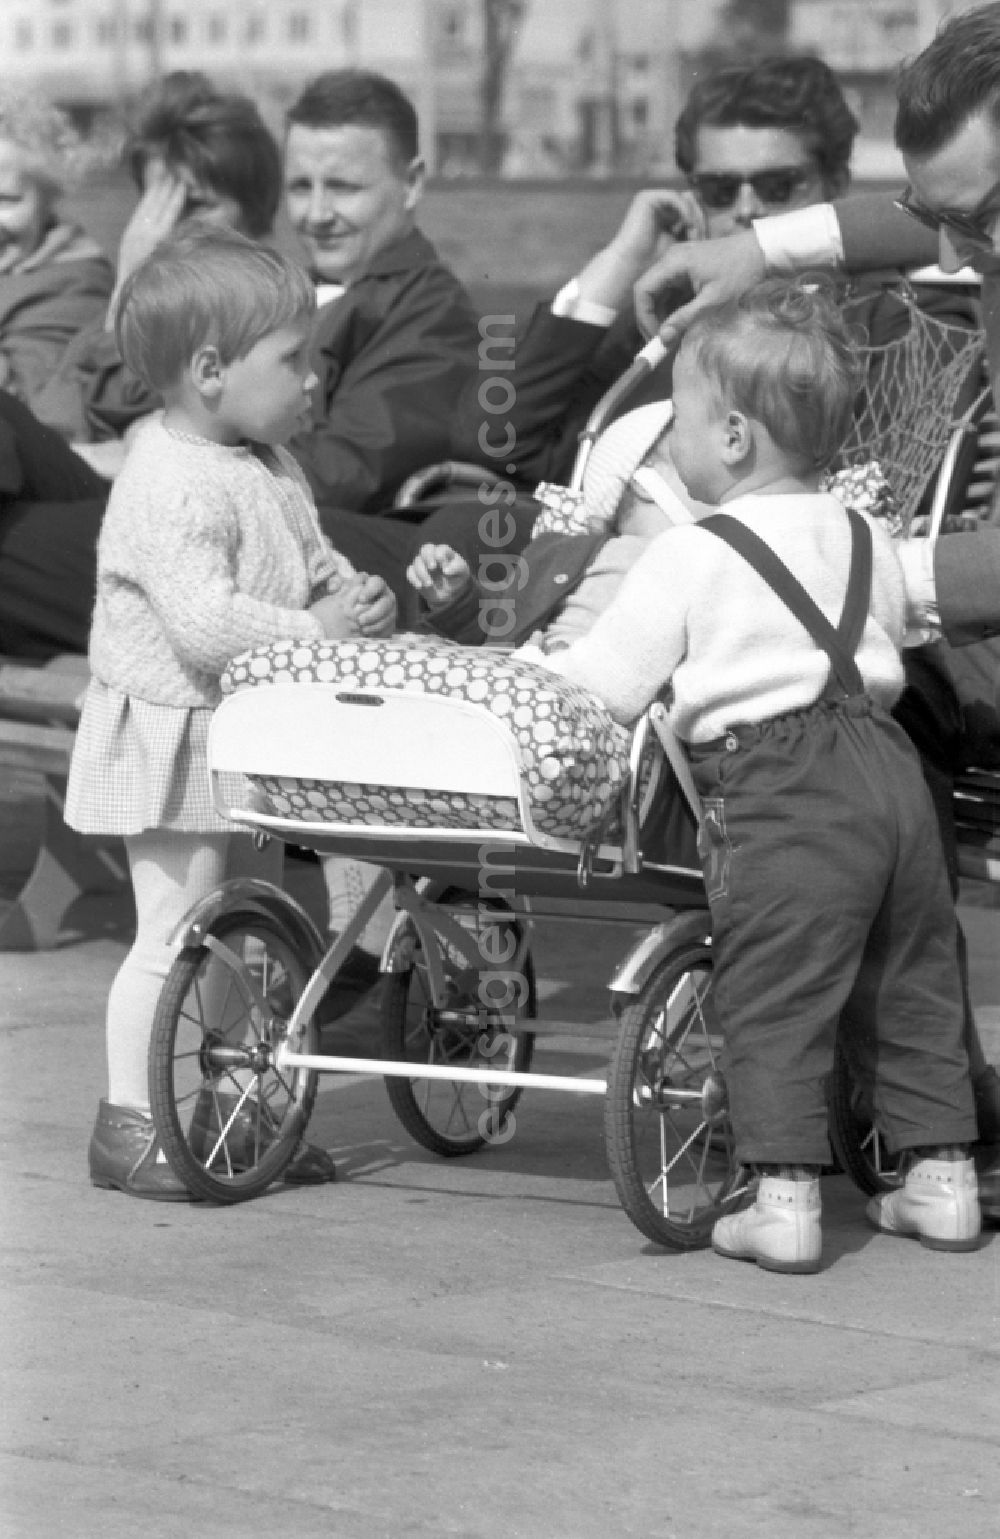 GDR image archive: Dessau - Two little kids are curious to a stroller in the city park in Dessau in Saxony - Anhalt